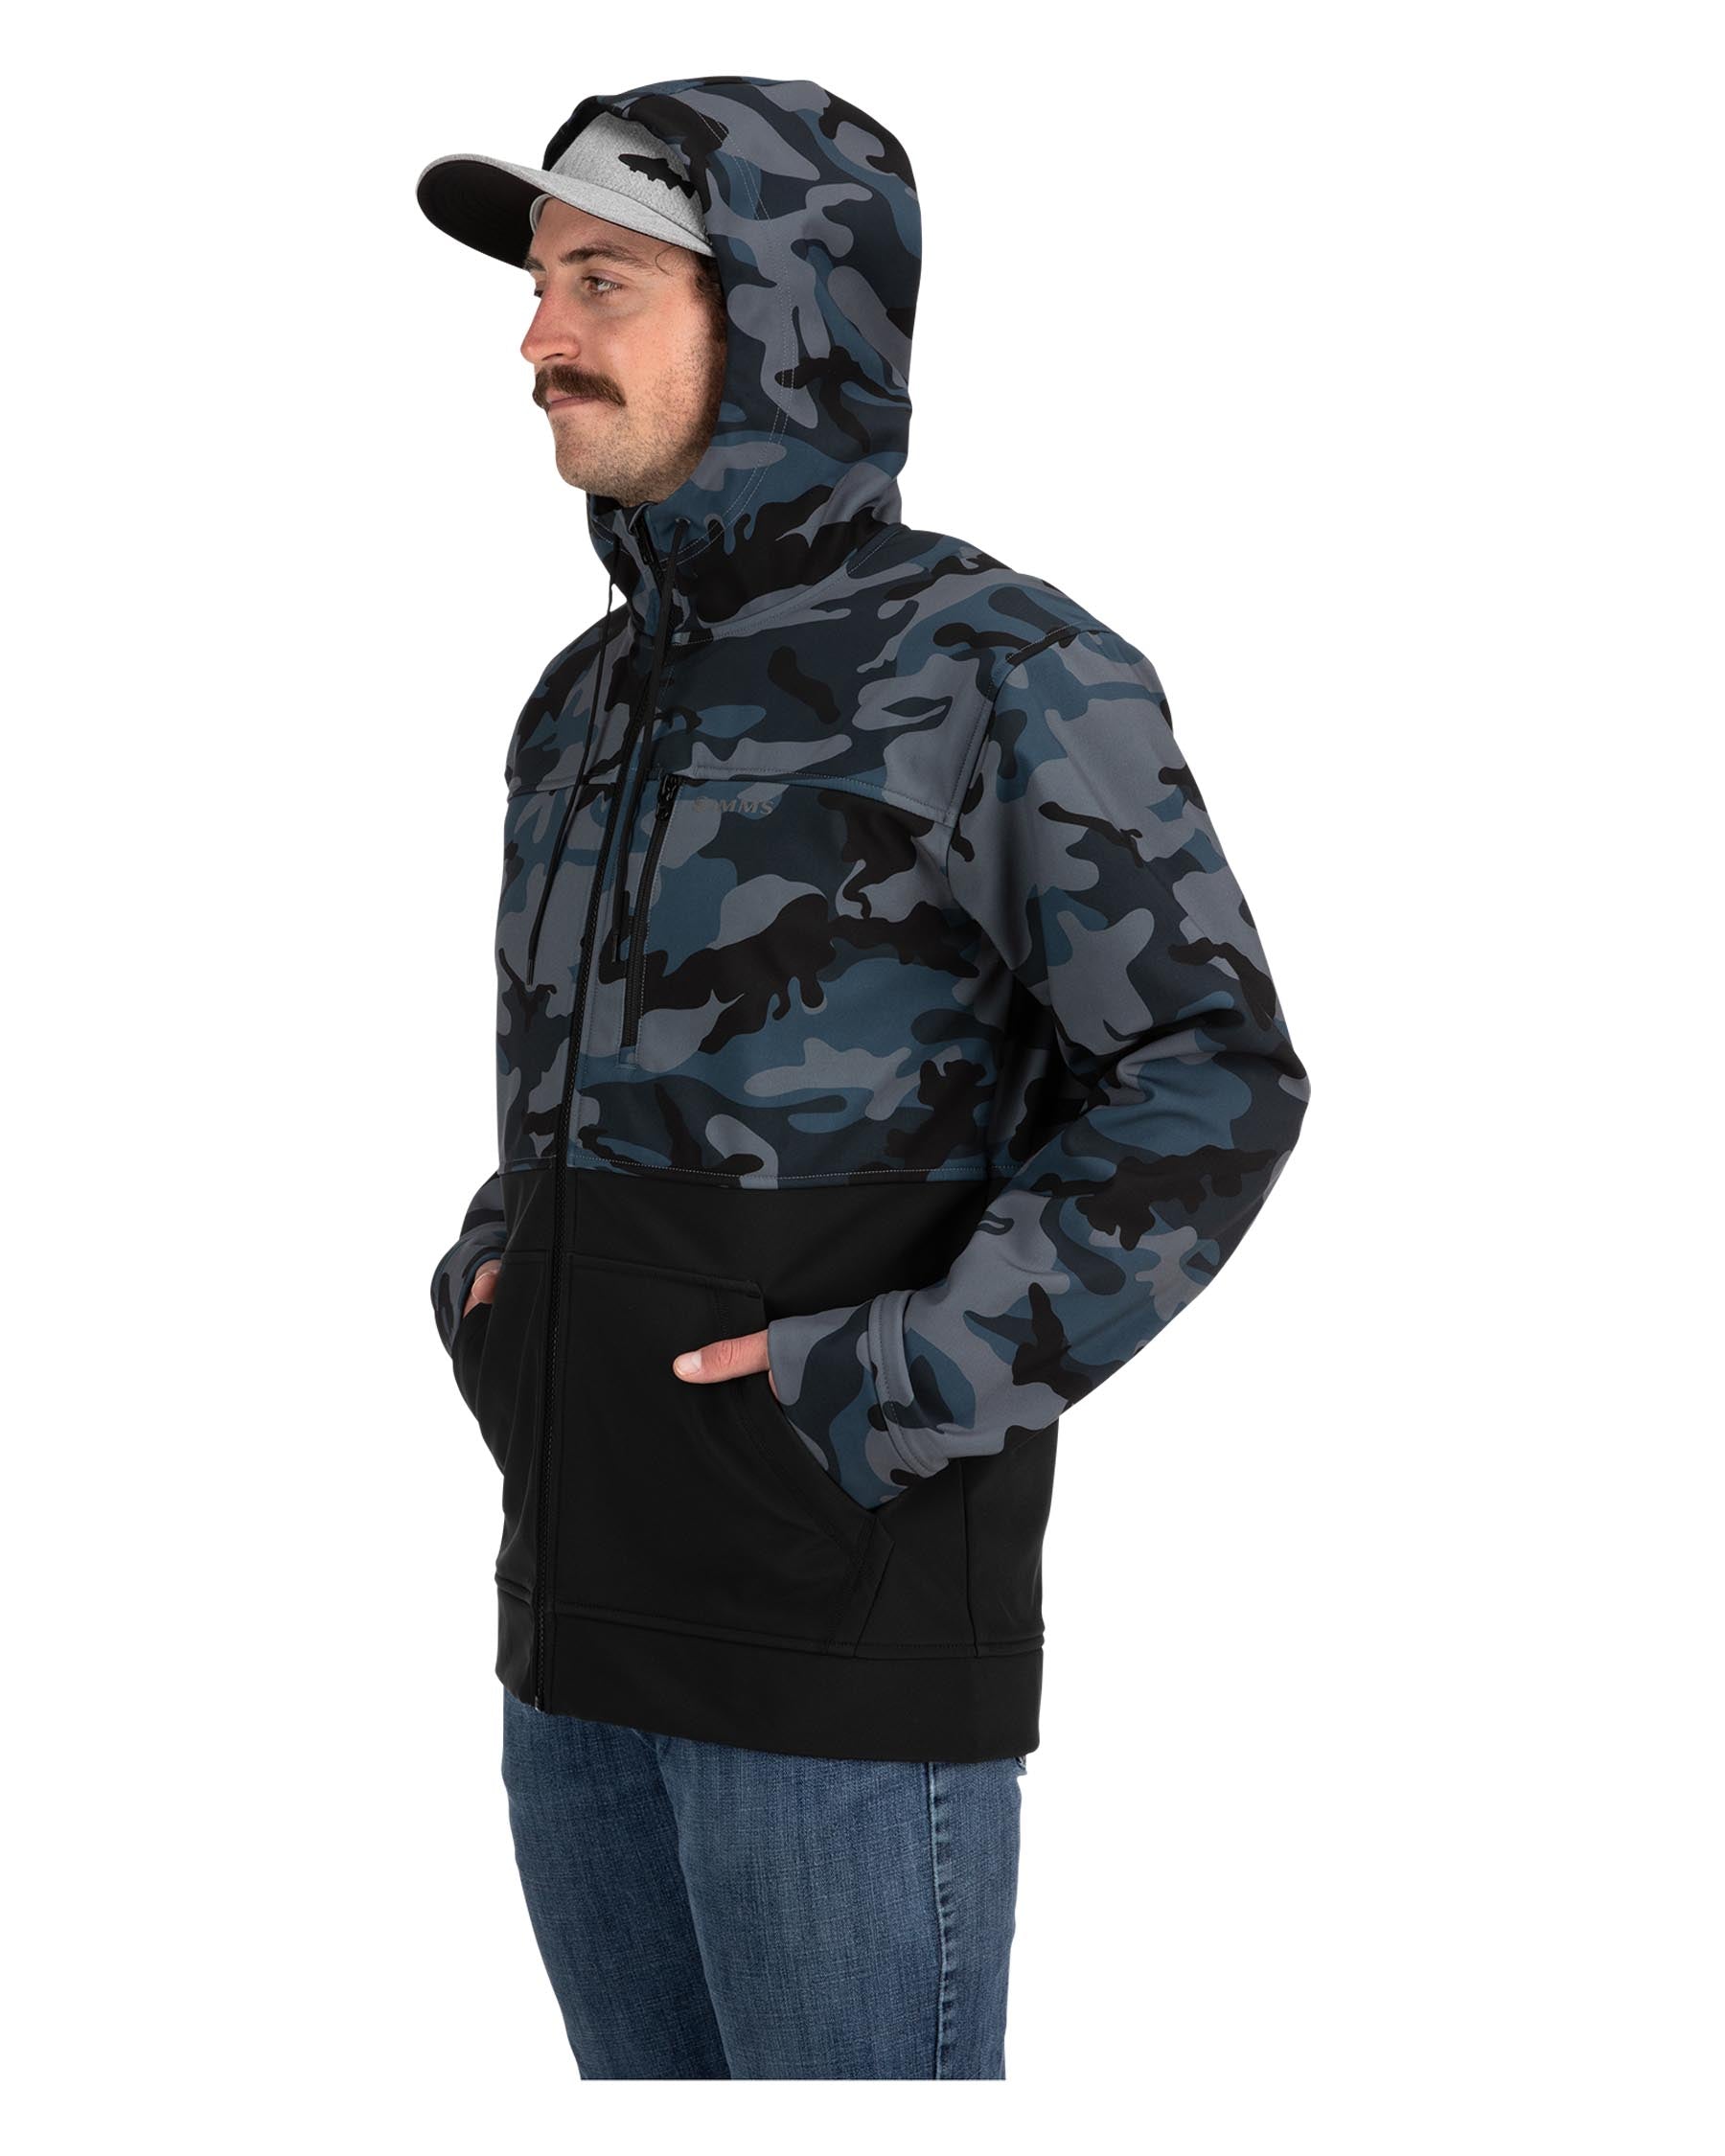 CLEARANCE SIMMS M's Rogue Hoody WOODLAND